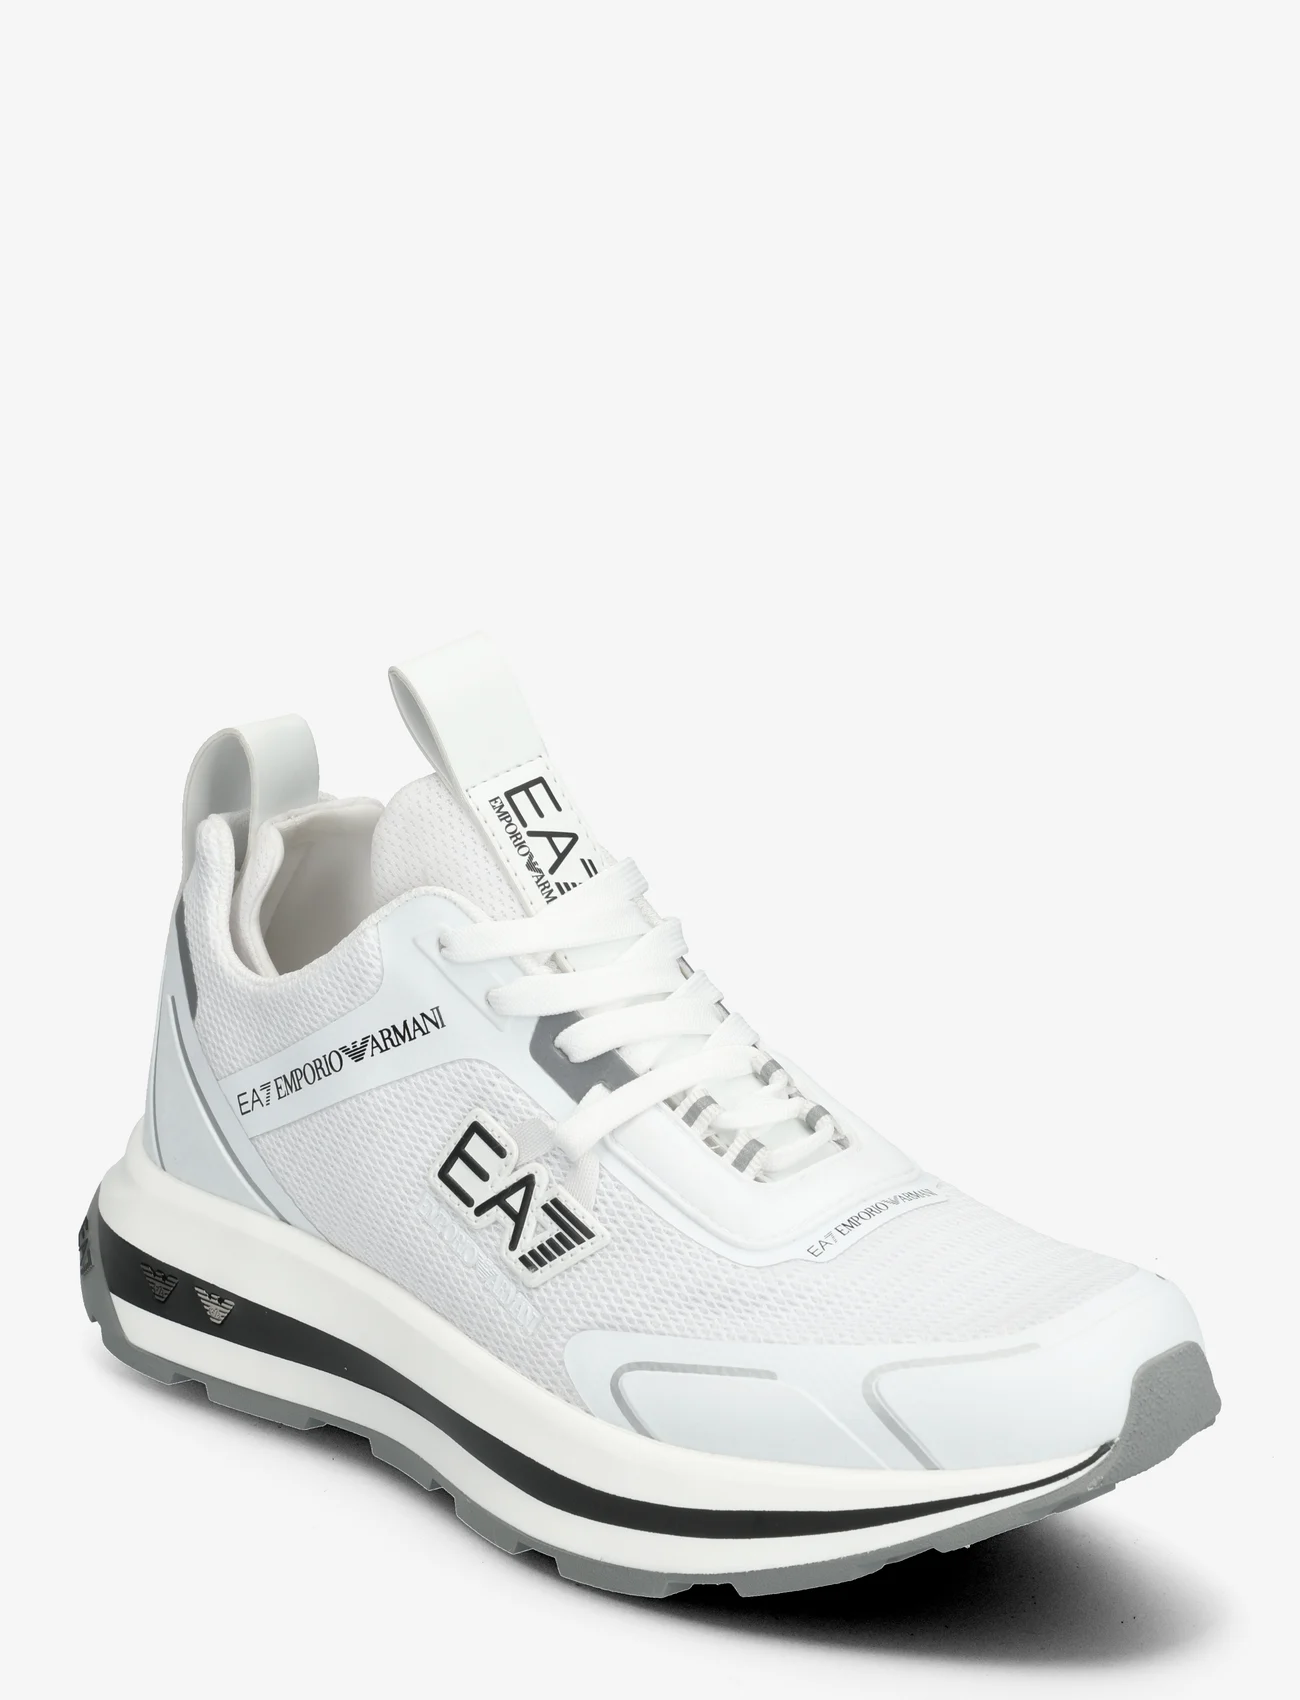 EA7 - SNEAKERS - laag sneakers - t539-white+blk+griffin - 0